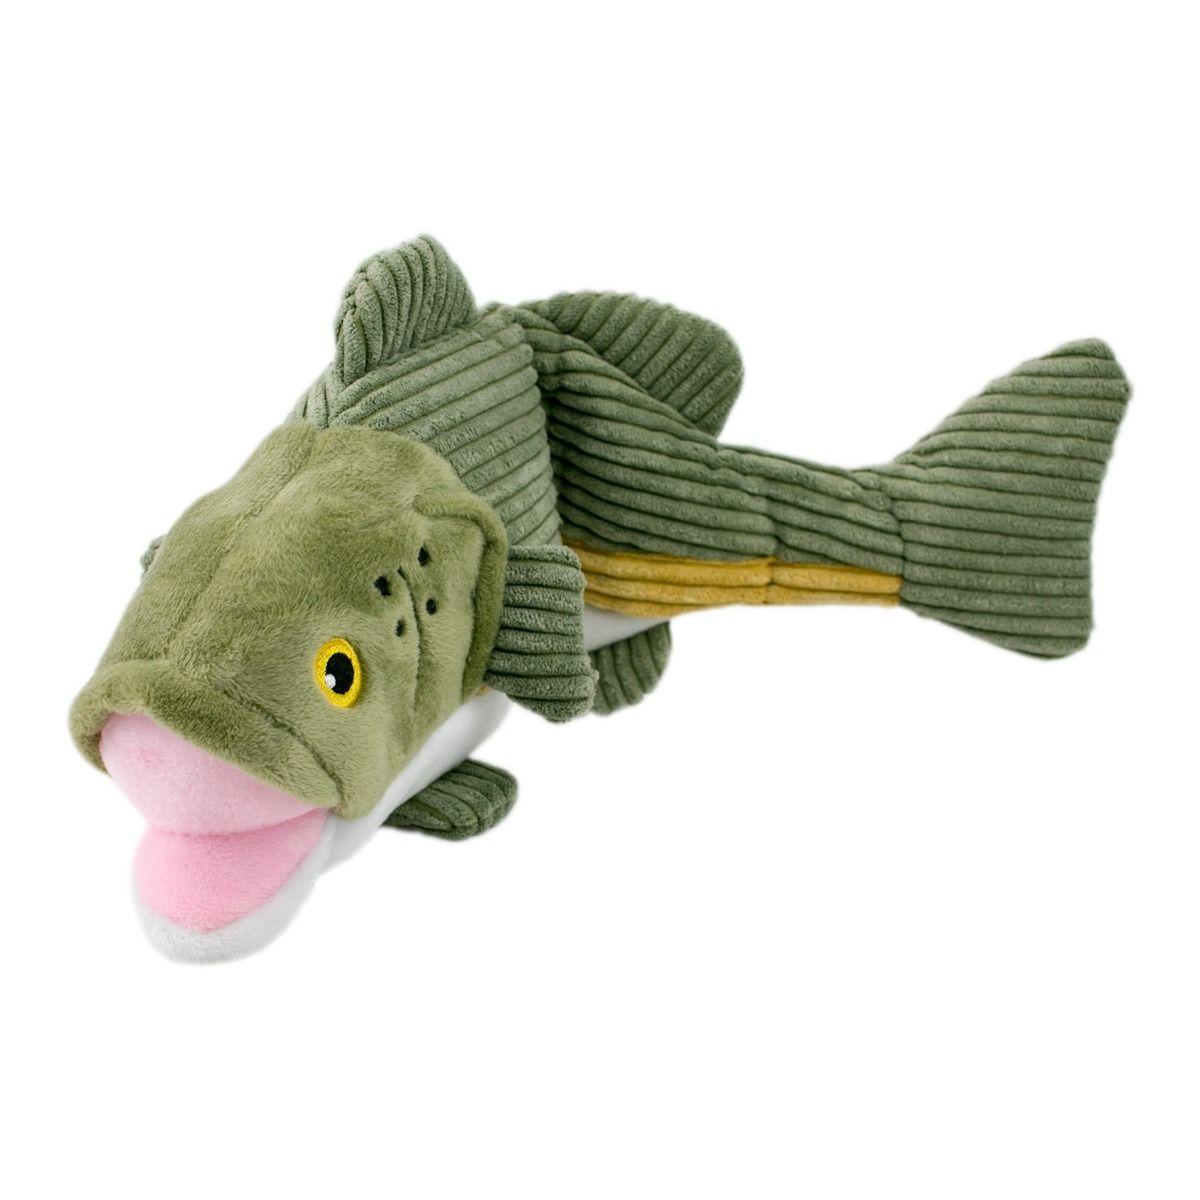 Tall Tails Animated Dog Toy - Bass